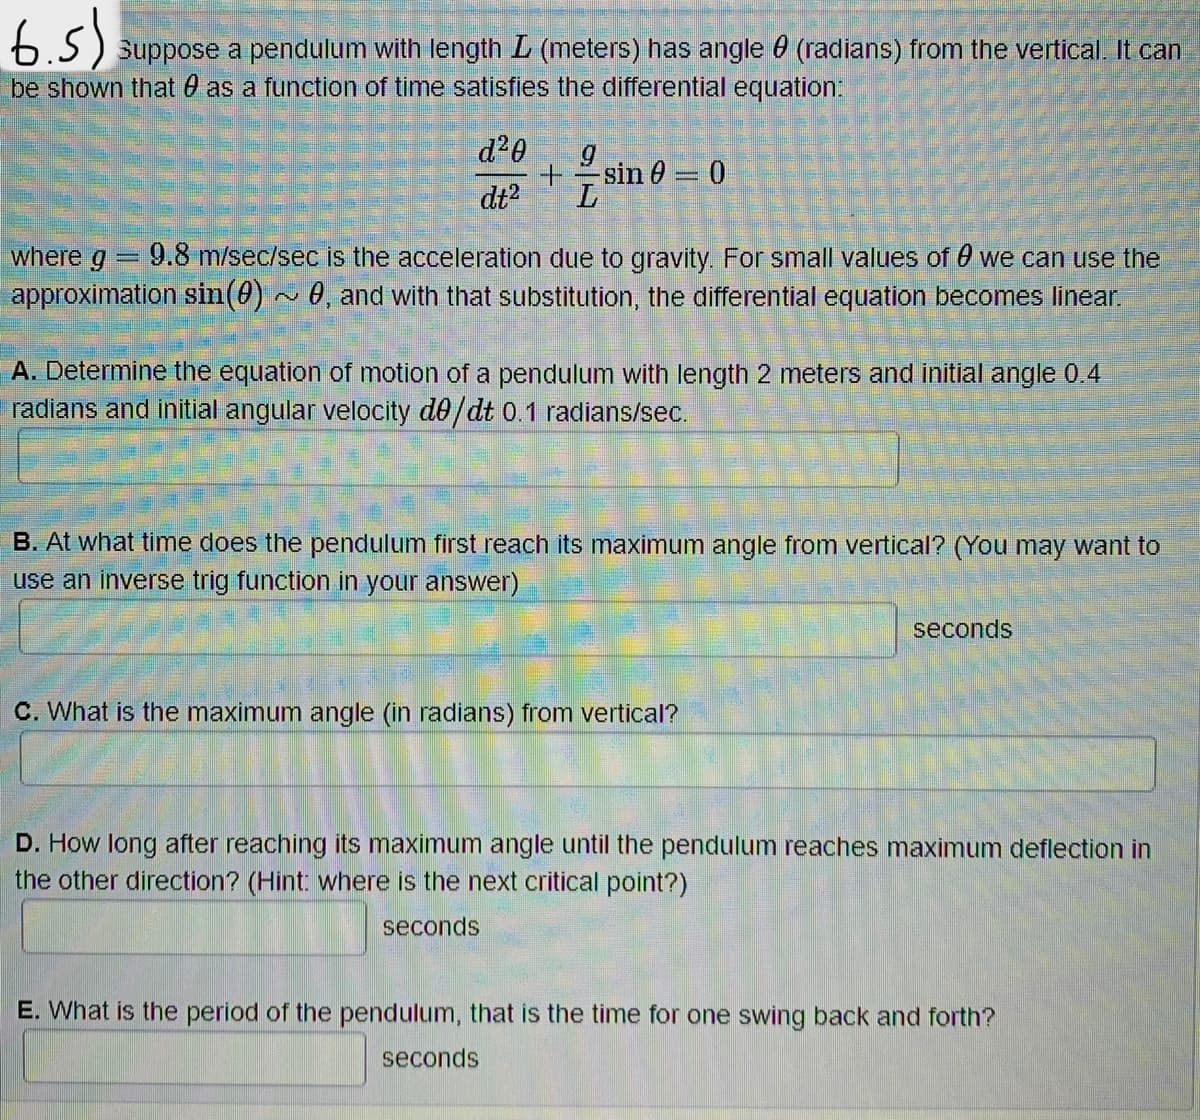 6.5) suppose a pendulum with length L (meters) has angle 0 (radians) from the vertical. It can
be shown that as a function of time satisfies the differential equation:
d²0
+ sin 0 = 0
dt² L
Comment
where g 9.8 m/sec/sec is the acceleration due to gravity. For small values of 0 we can use the
approximation sin(0)~ 0, and with that substitution, the differential equation becomes linear.
A. Determine the equation of motion of a pendulum with length 2 meters and initial angle 0.4
radians and initial angular velocity de/dt 0.1 radians/sec.
B. At what time does the pendulum first reach its maximum angle from vertical? (You may want to
use an inverse trig function in your answer)
seconds
C. What is the maximum angle (in radians) from vertical?
D. How long after reaching its maximum angle until the pendulum reaches maximum deflection in
the other direction? (Hint: where is the next critical point?)
seconds
E. What is the period of the pendulum, that is the time for one swing back and forth?
seconds